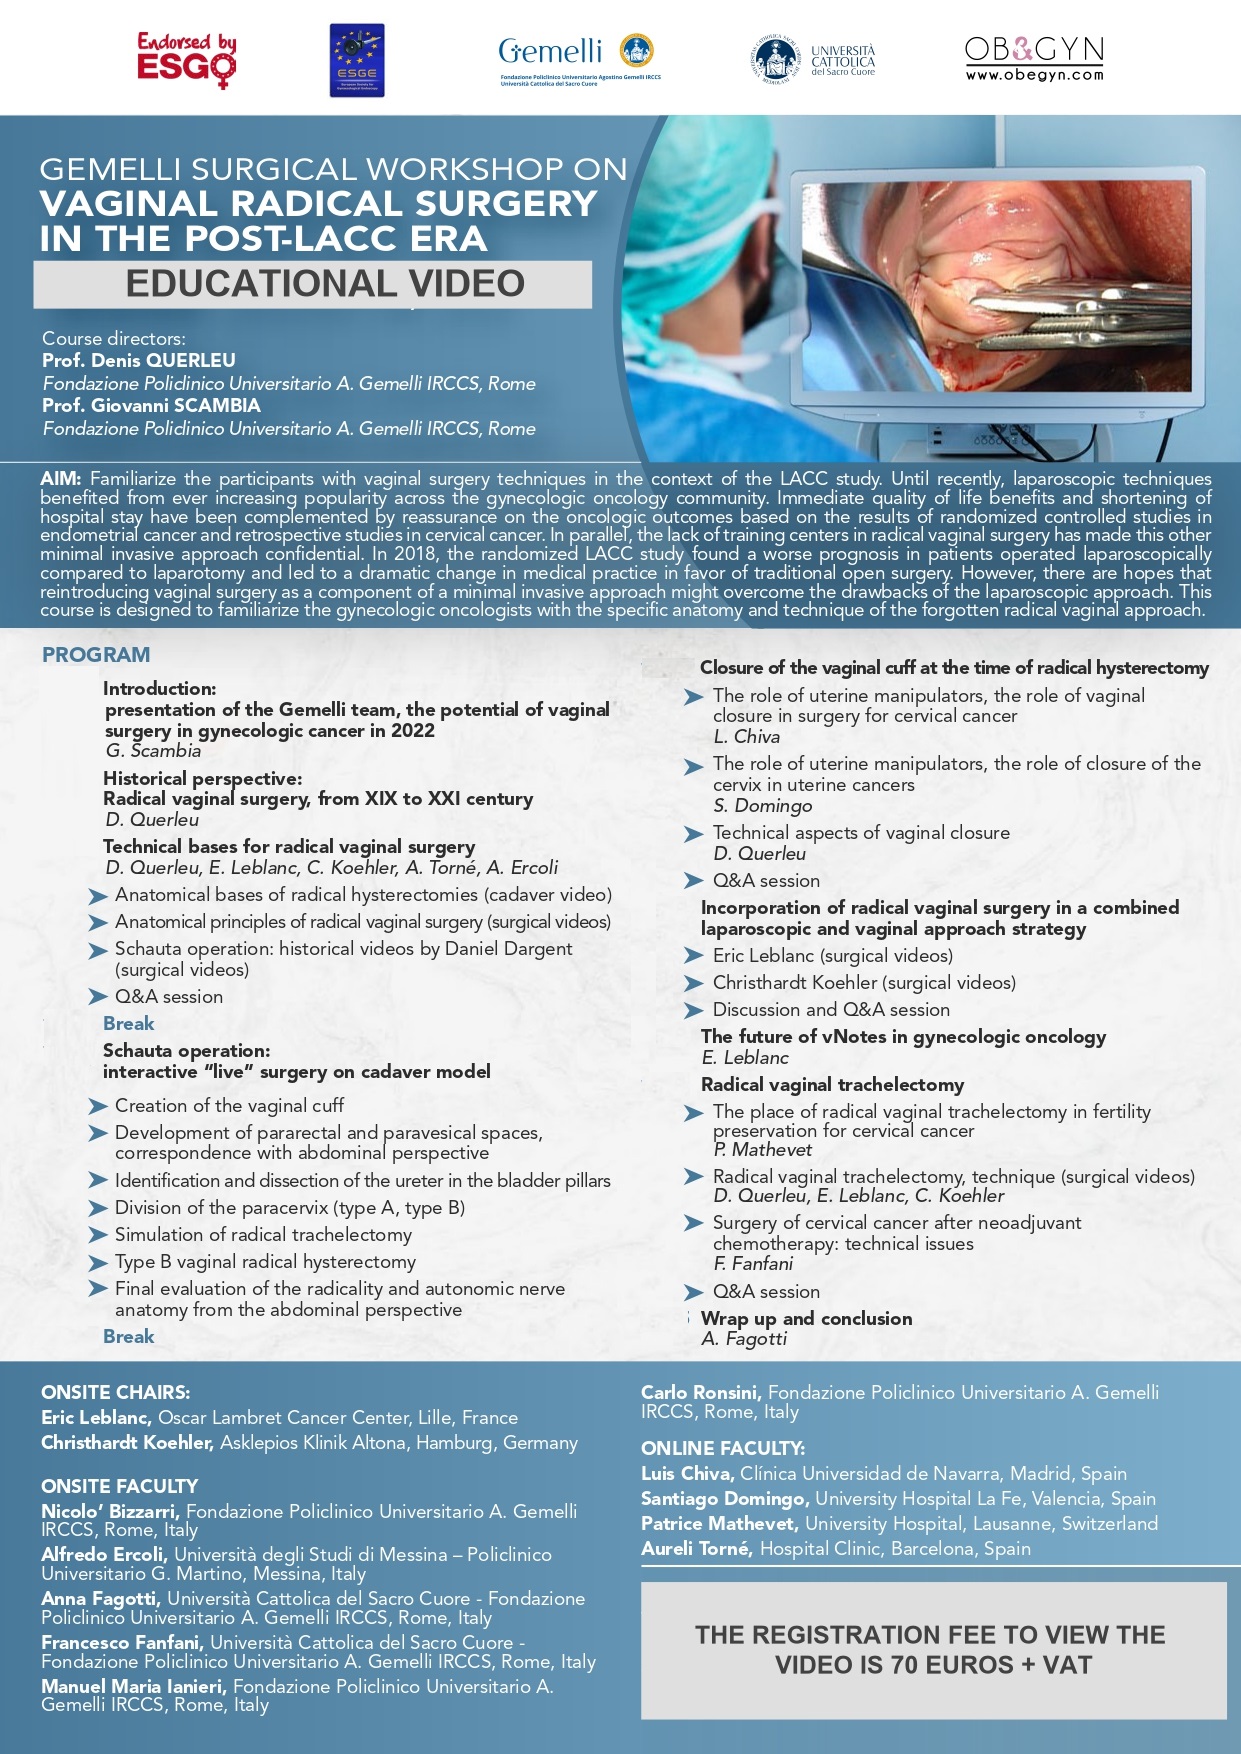 Programma Educational video:  GEMELLI SURGICAL WORKSHOP ON VAGINAL RADICAL SURGERY IN THE POST-LACC ERA